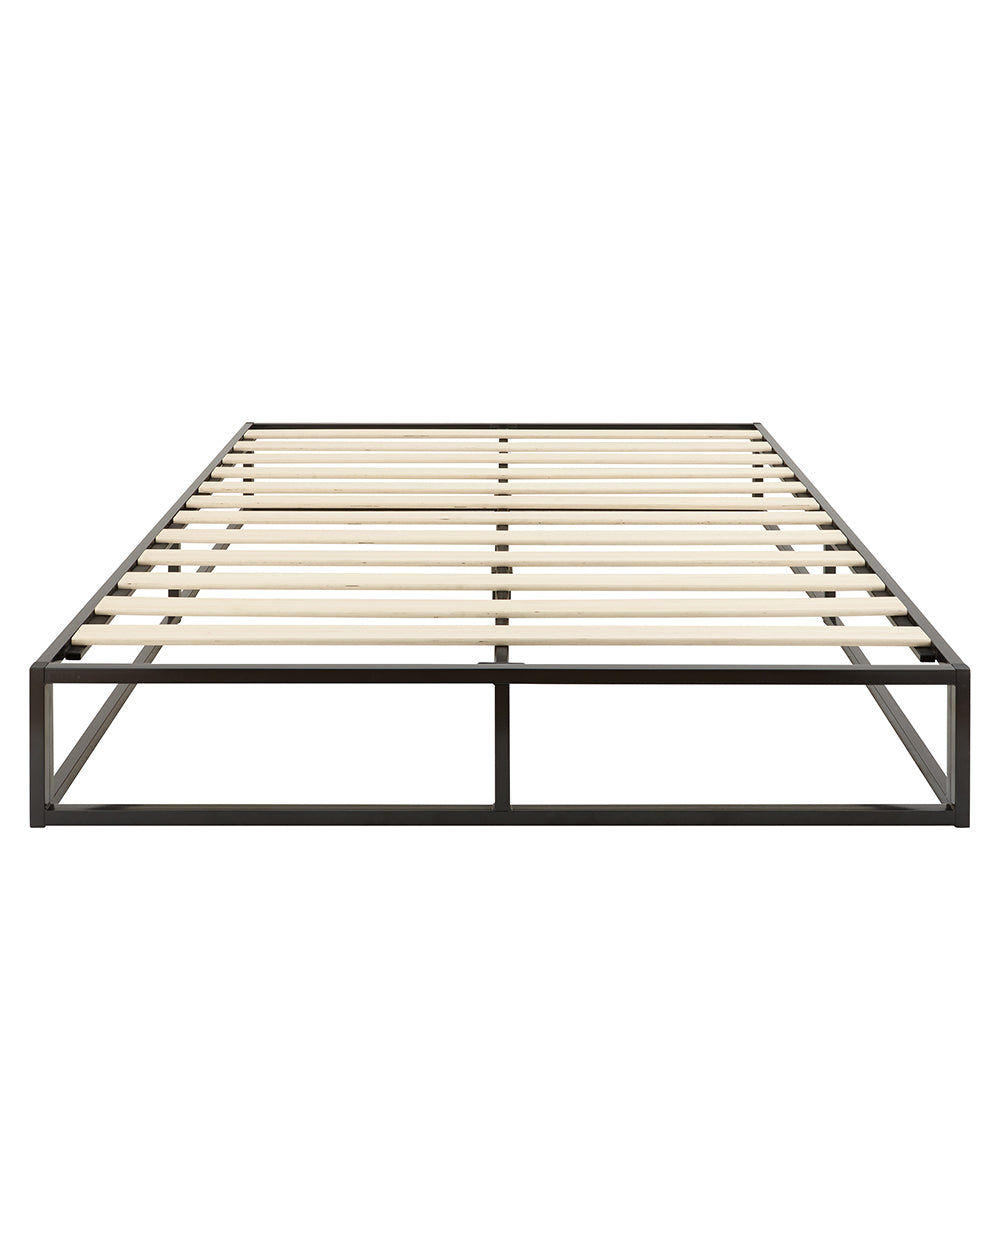 full photo of this bed frame on a white background front view